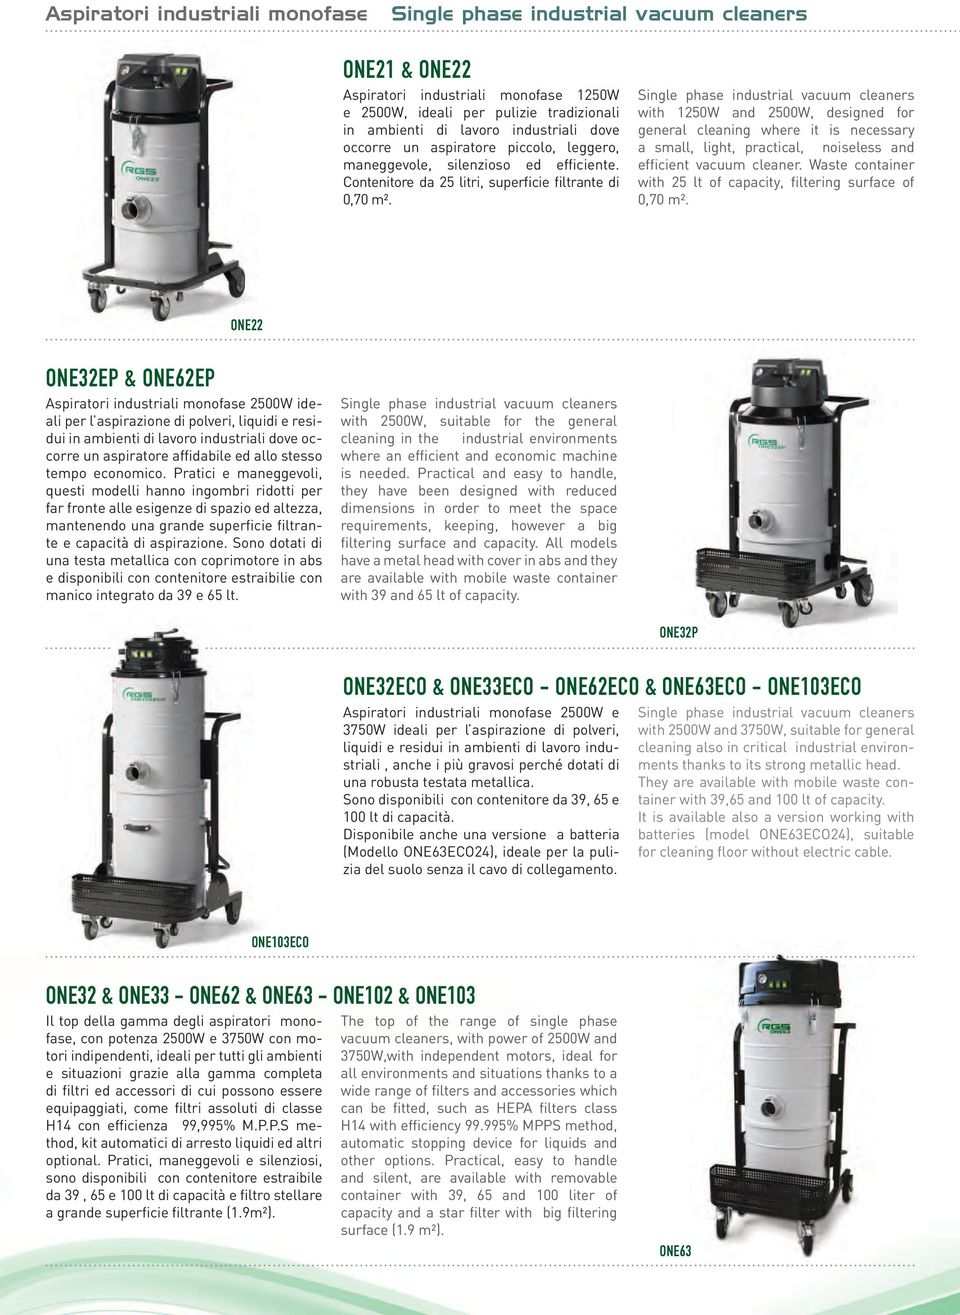 Single phase industrial vacuum cleaners with 1250W and 2500W, designed for general cleaning where it is necessary a small, light, practical, noiseless and efficient vacuum cleaner.